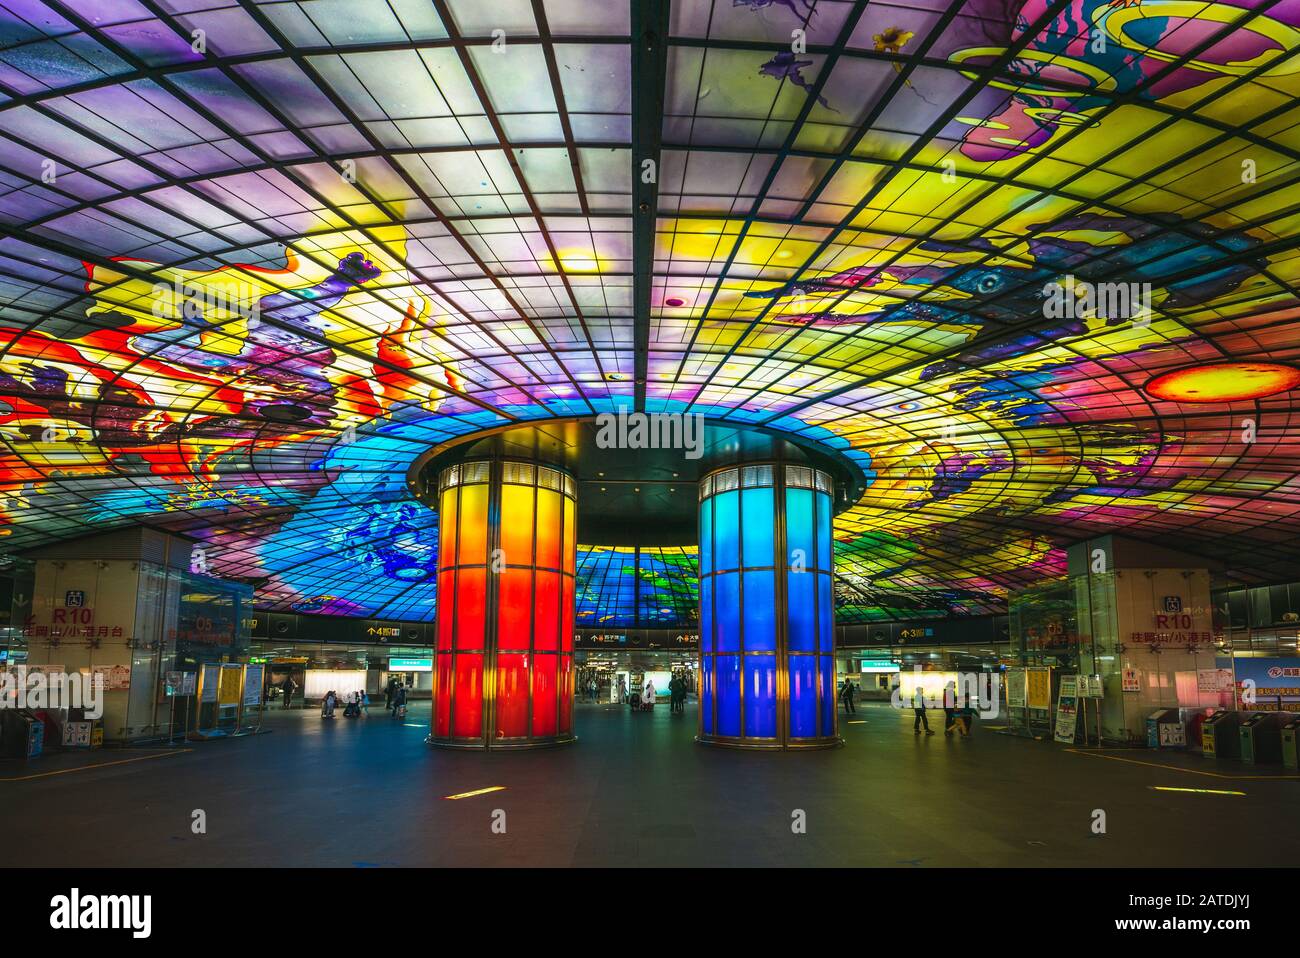 Kaohsiung, Taiwan - January 30, 2020: The Dome of Light in Formosa Boulevard Station. It commemorates the harrowing birth of Taiwan’s democracy. Stock Photo